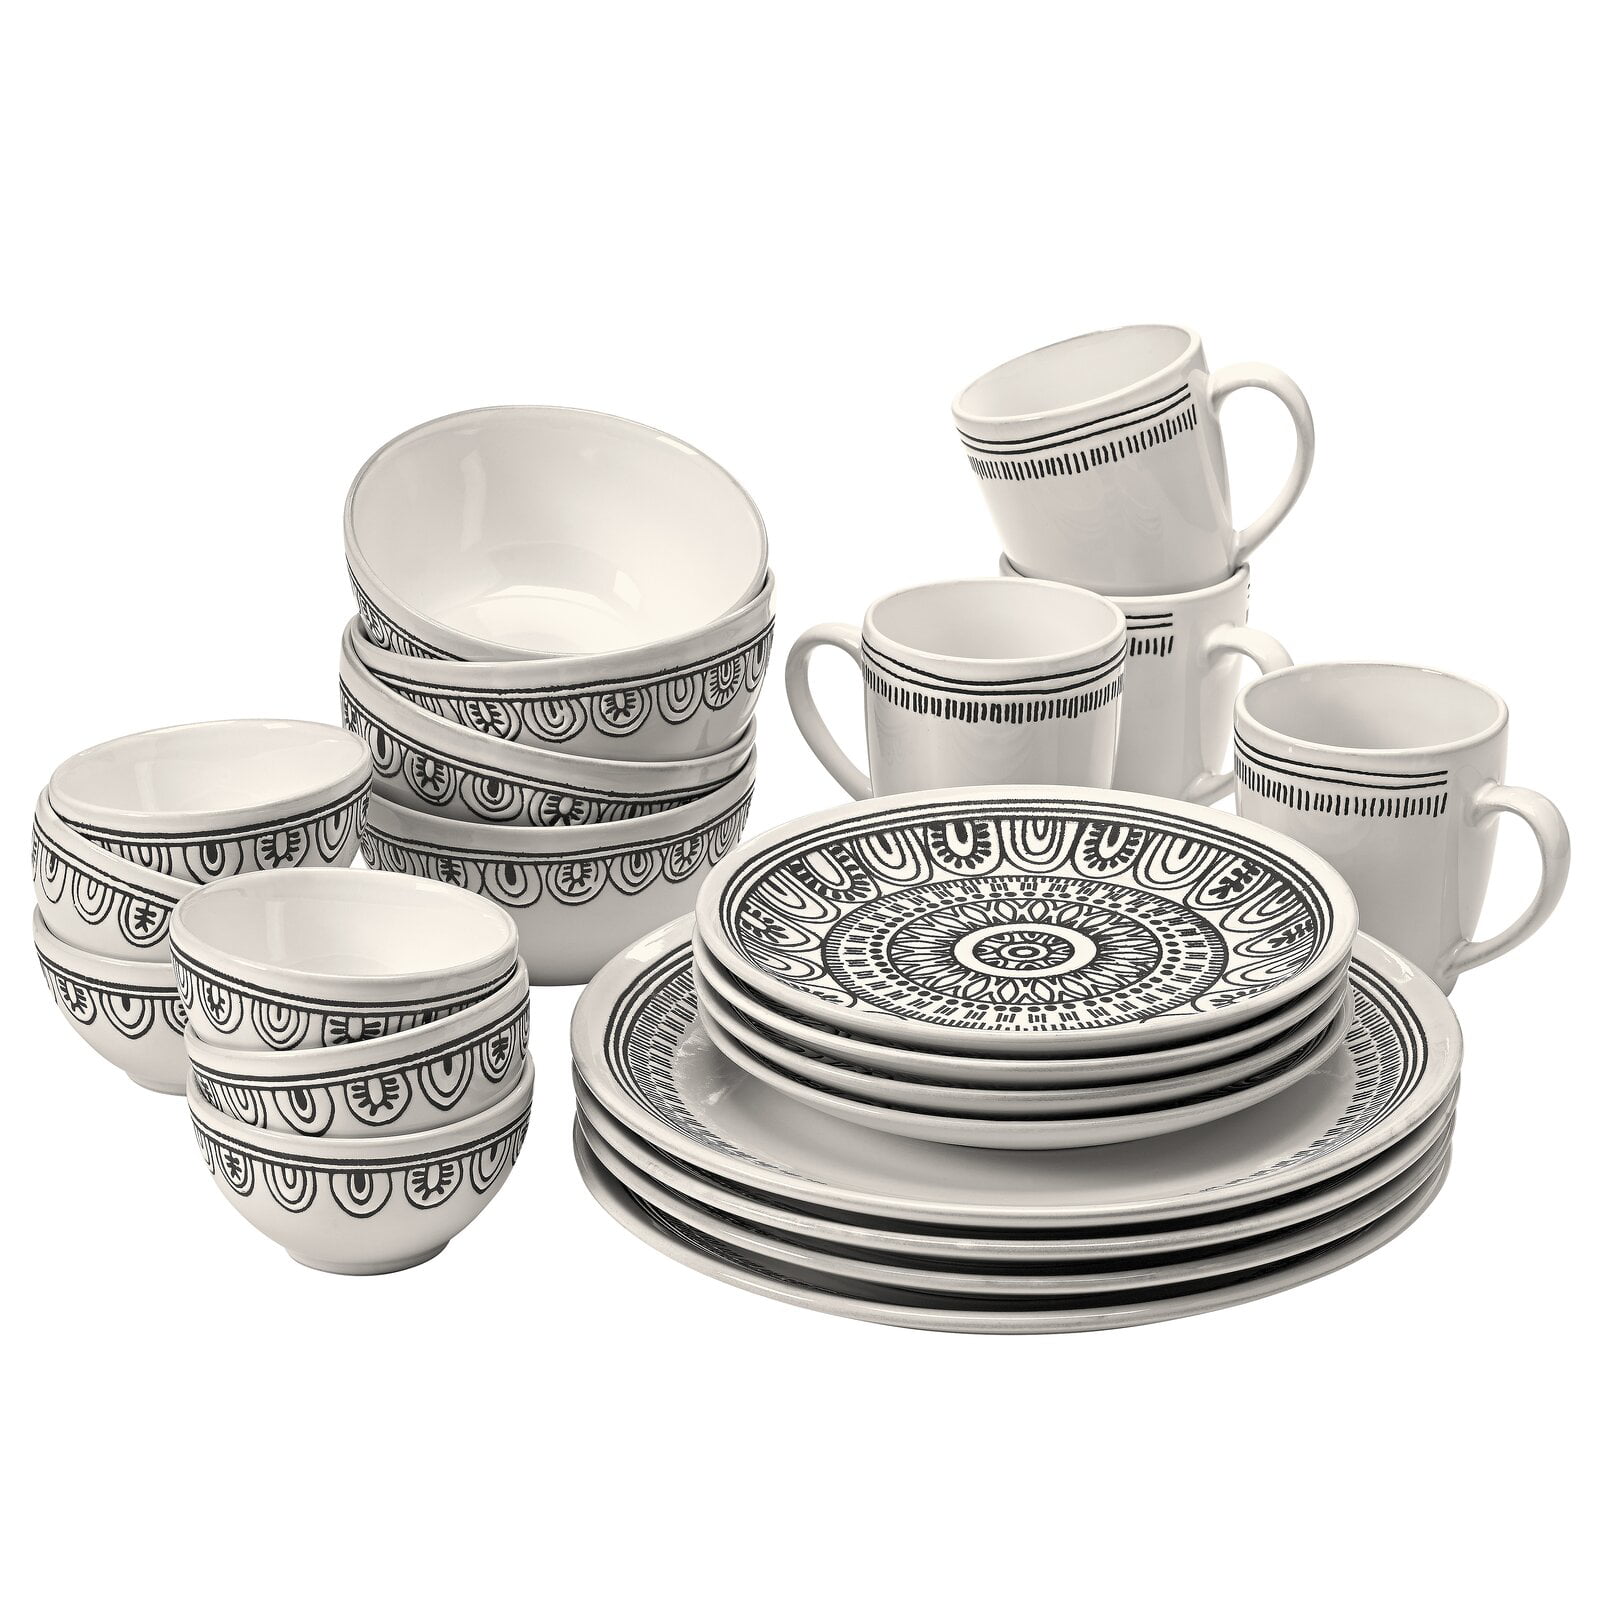 Details about   22 Piece Dinnerware Set Plates Mugs Bowls Service for 4 Gray Salad Stoneware New 